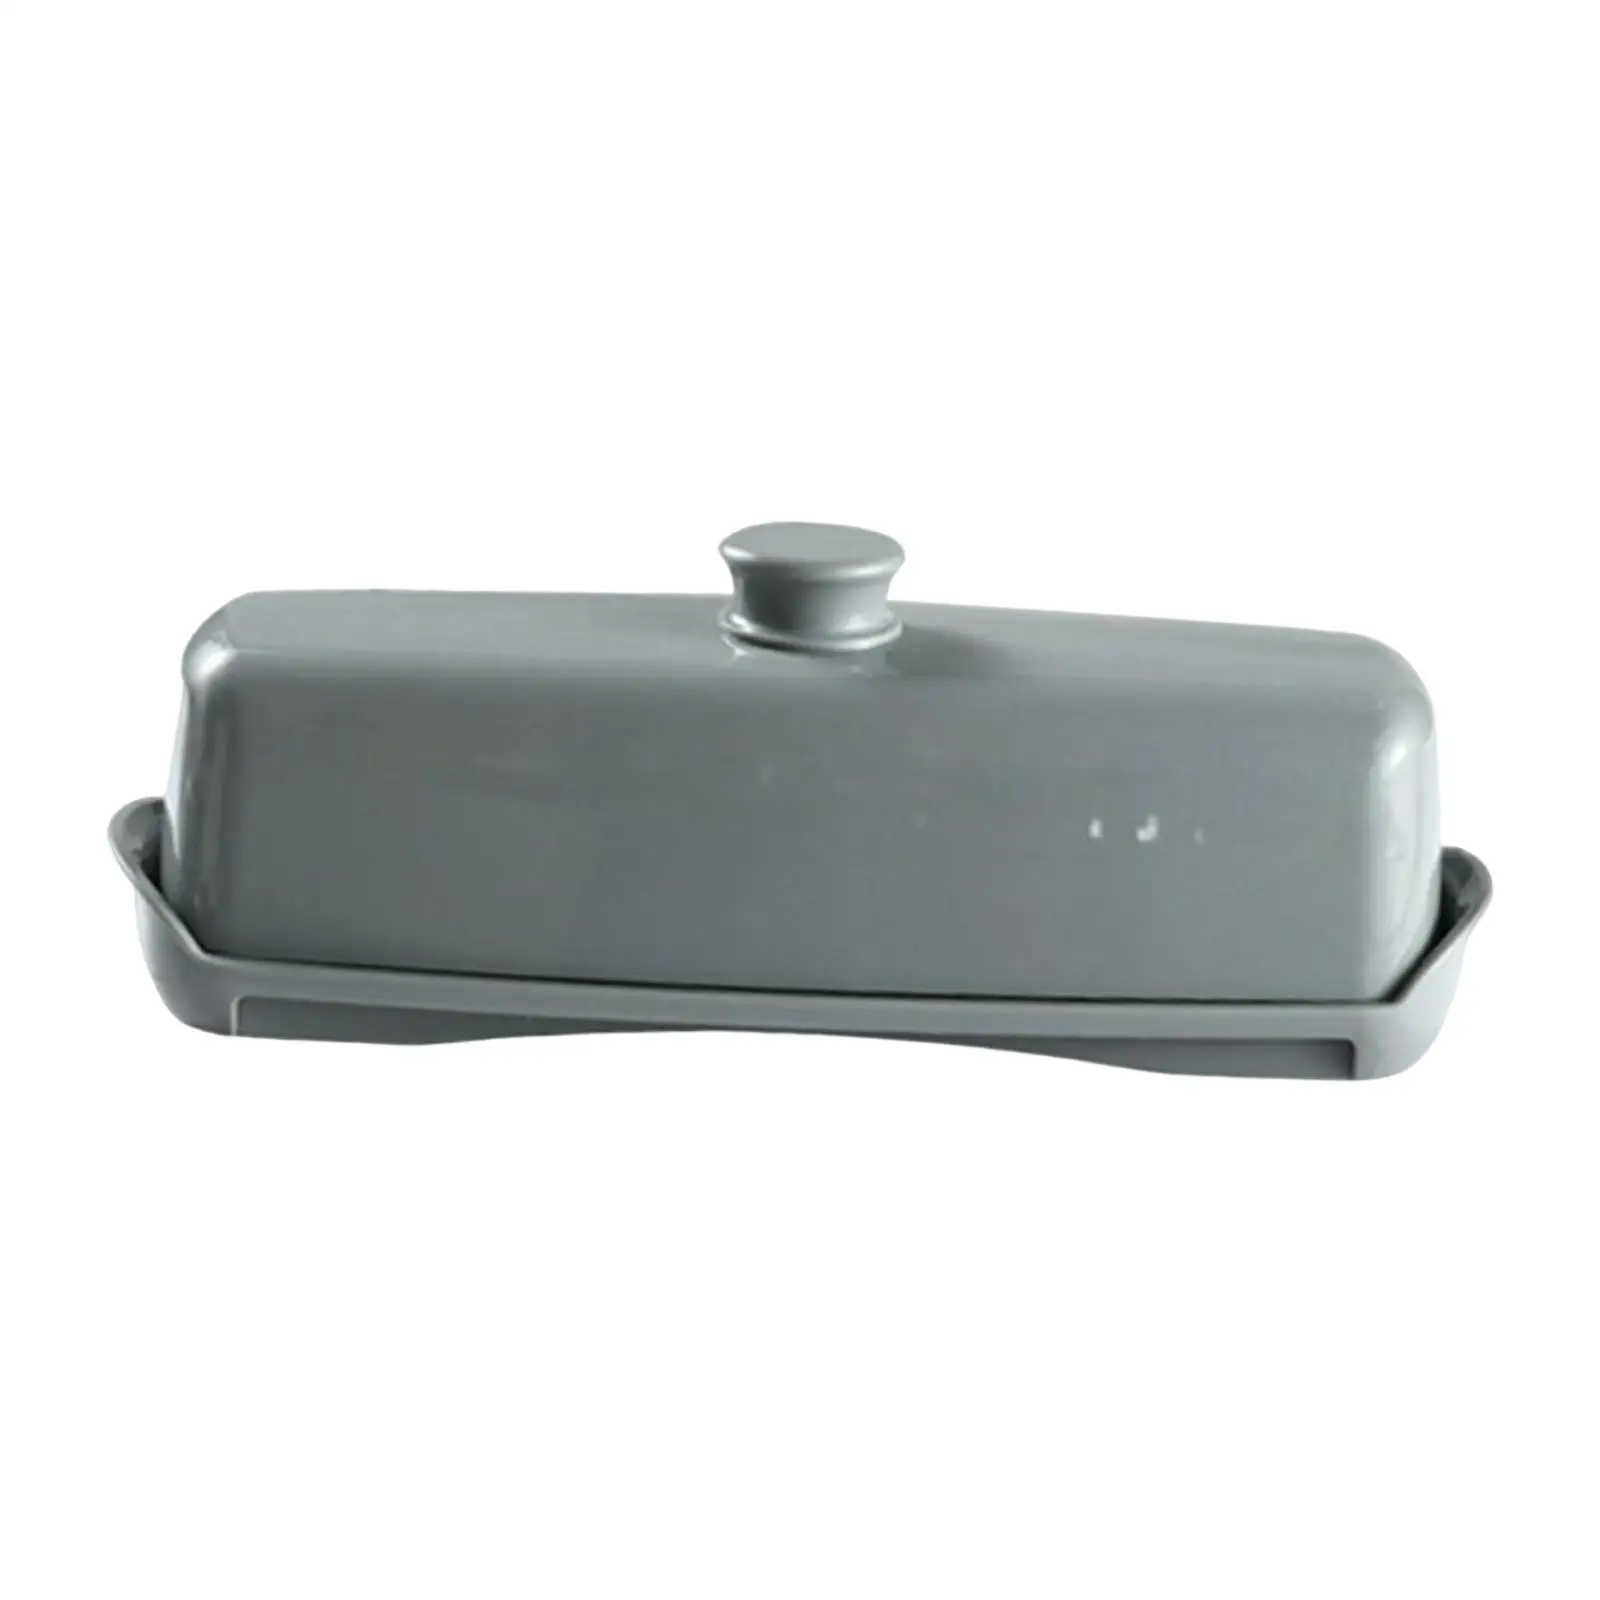 Household Butter Dish Kitchen Organization Butter Holder for Dining Room